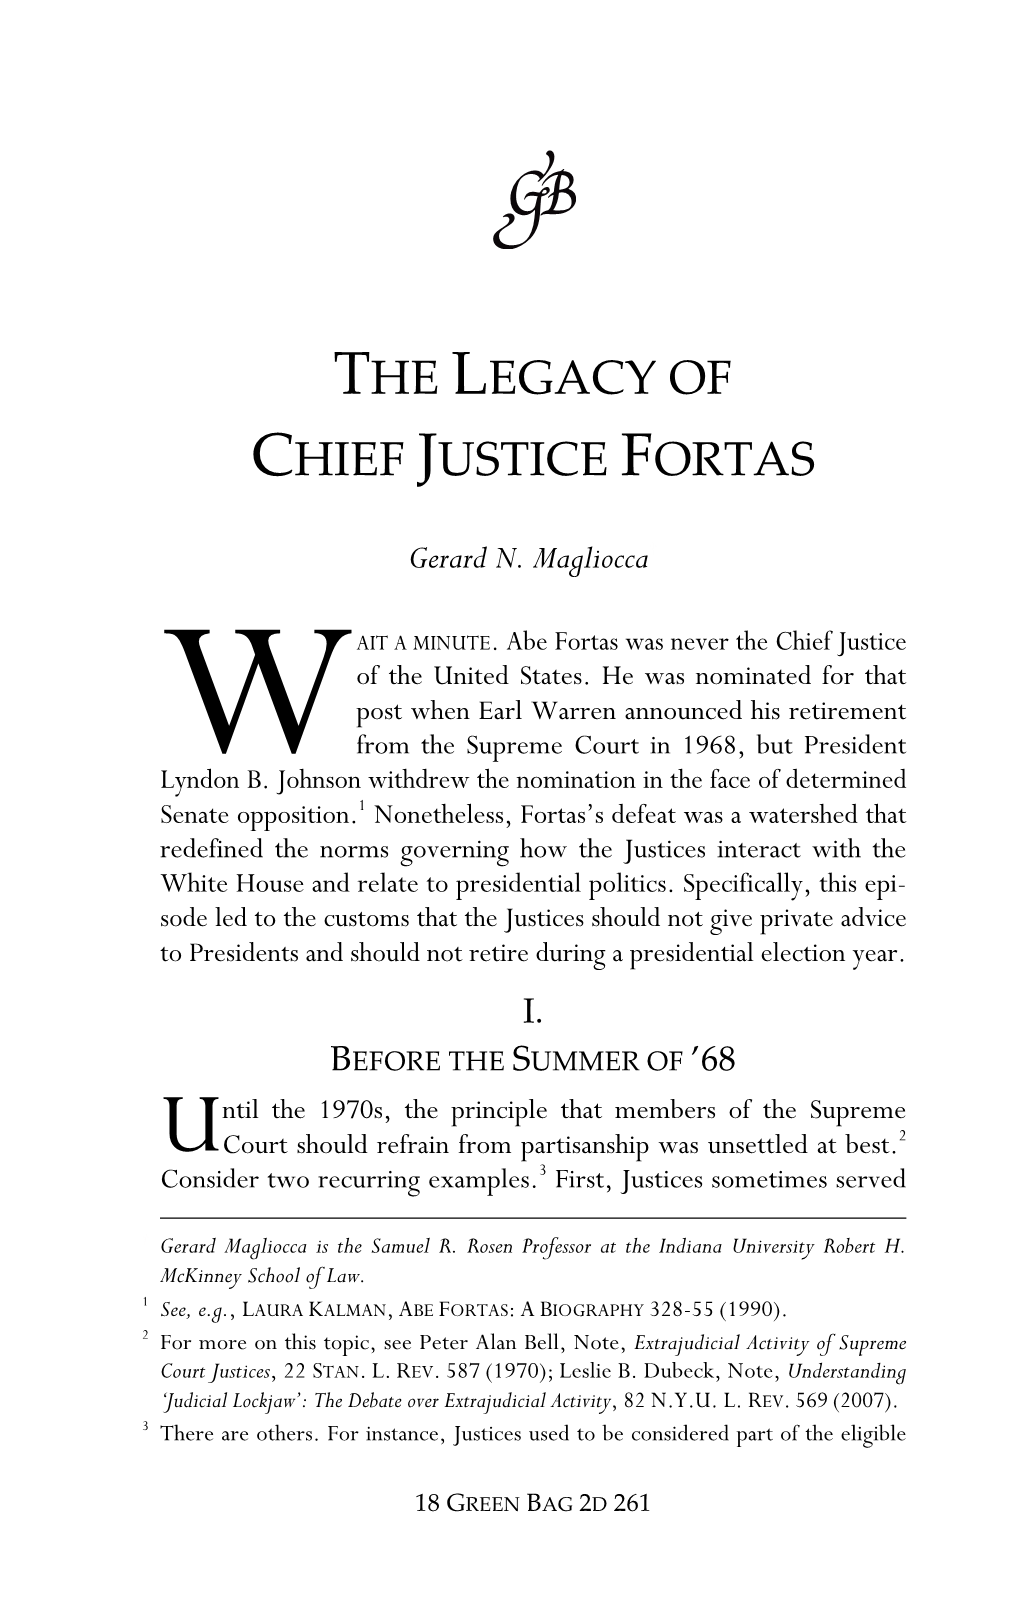 The Legacy of Chief Justice Fortas